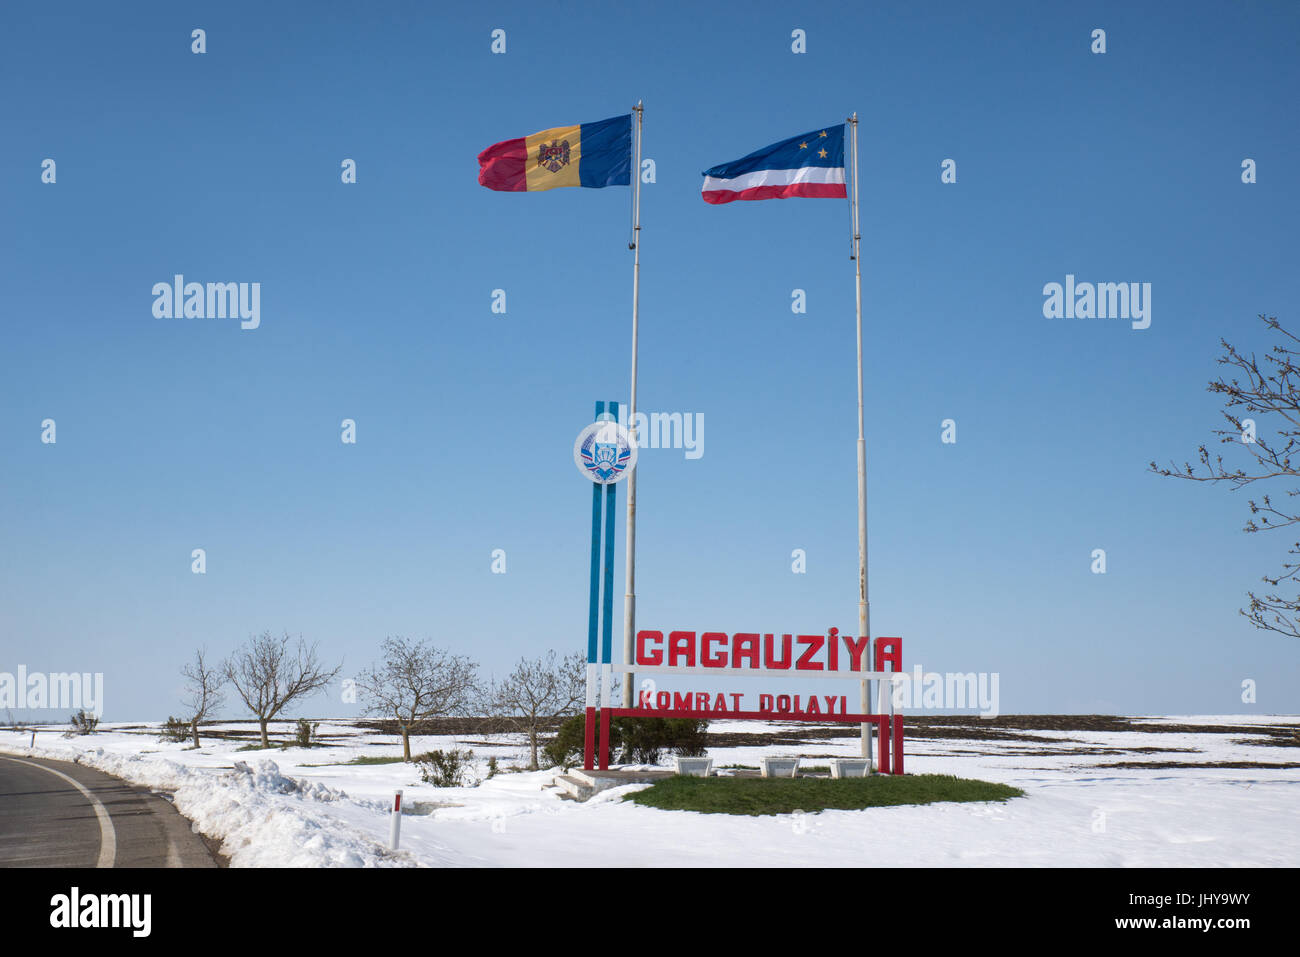 Moldovan and Gagauz flags fly at the 'Welcome to Gagauzia' sign at border of the autonomous region of Gagauzia Stock Photo